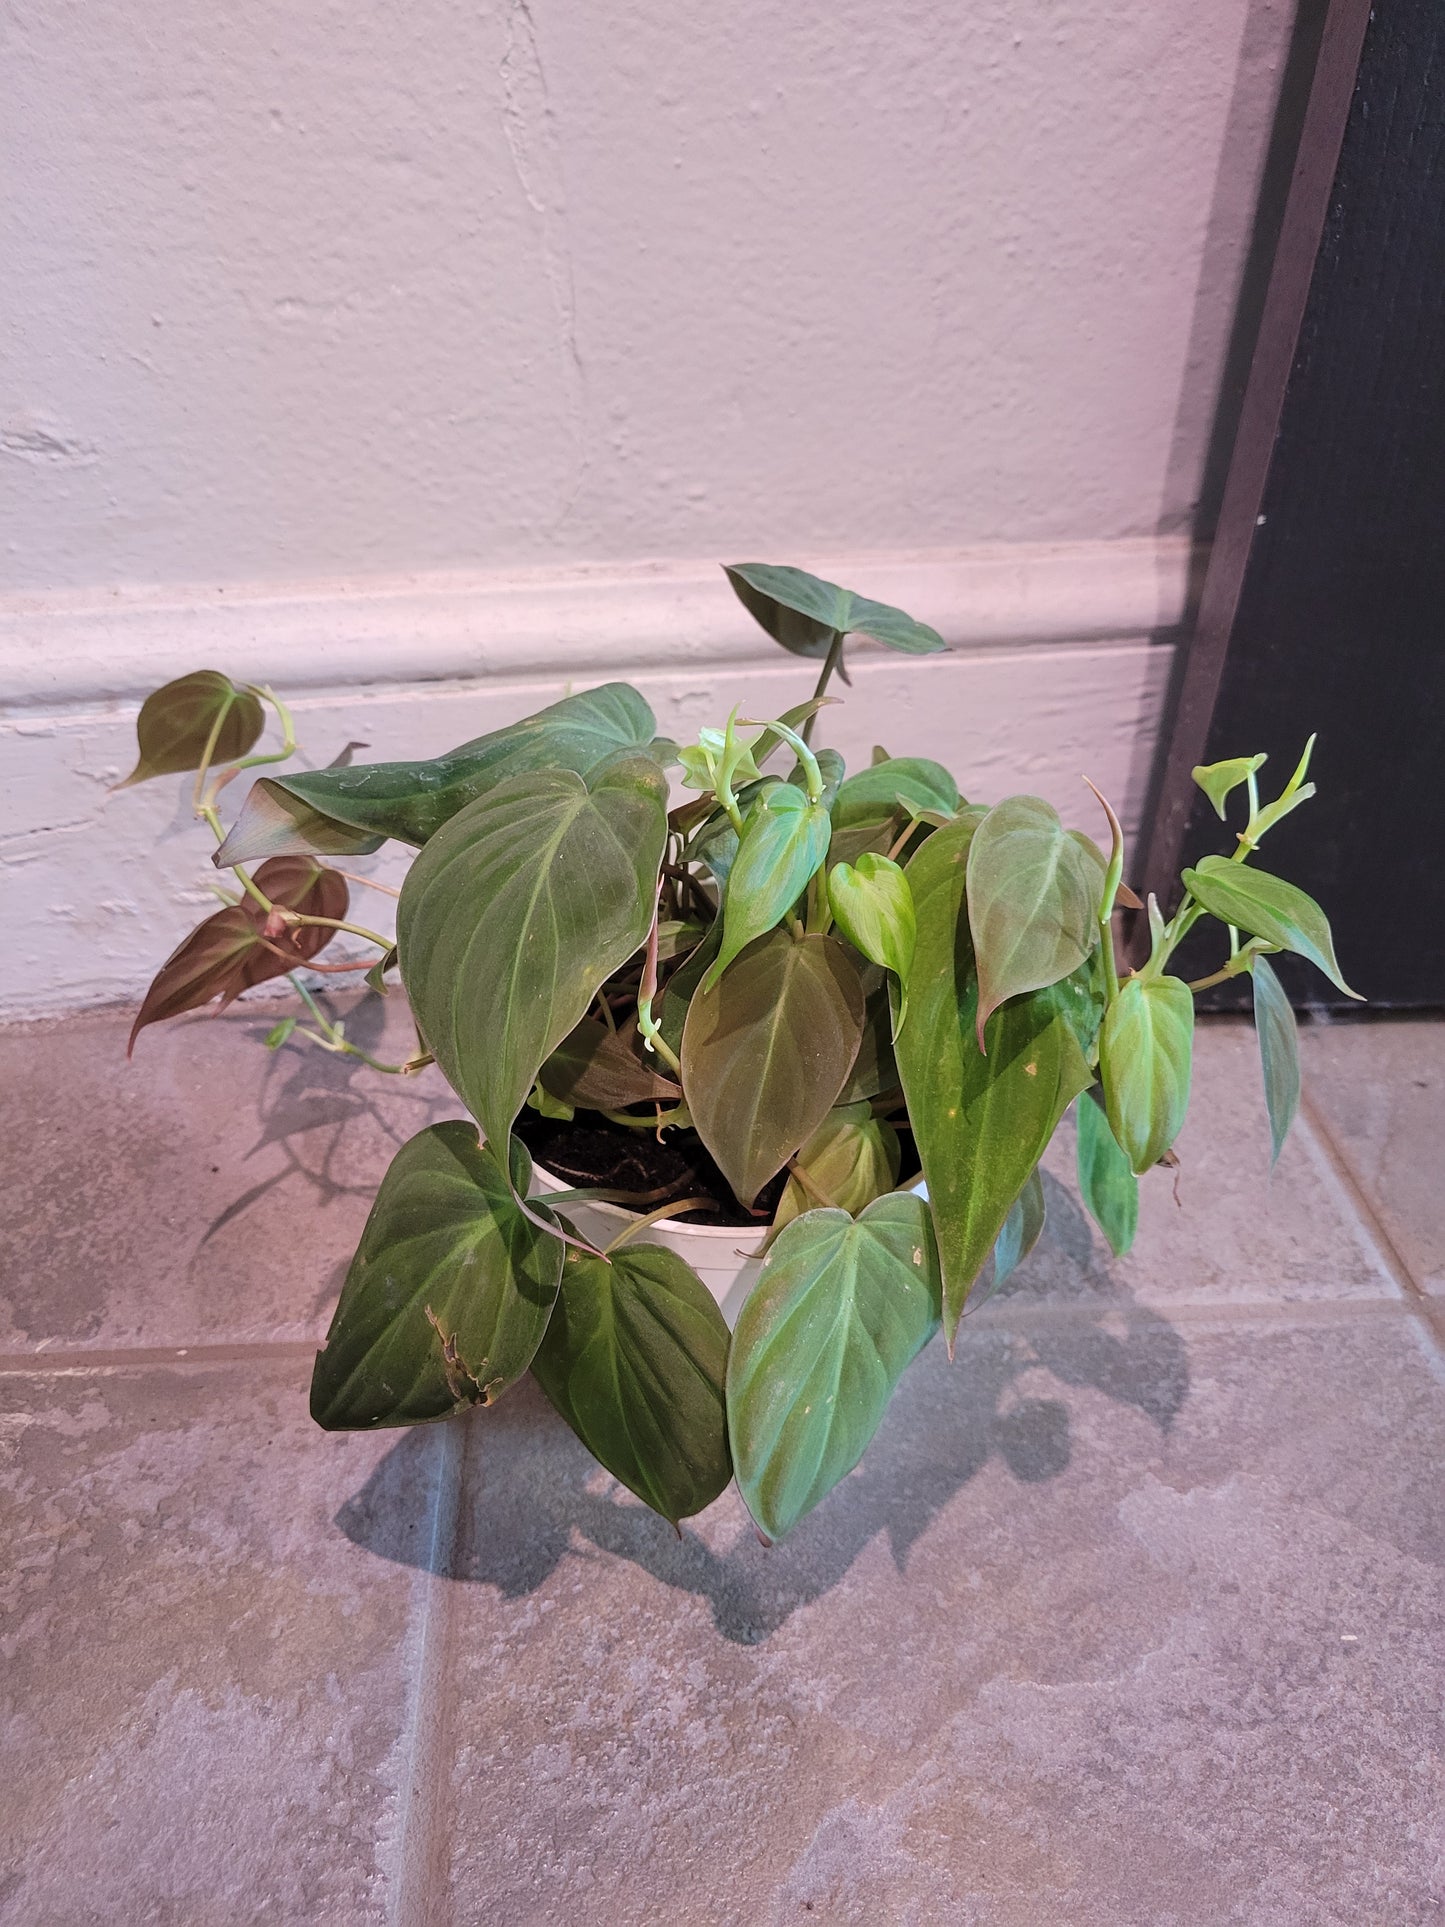 Philodendron Hederaceum "Micans"